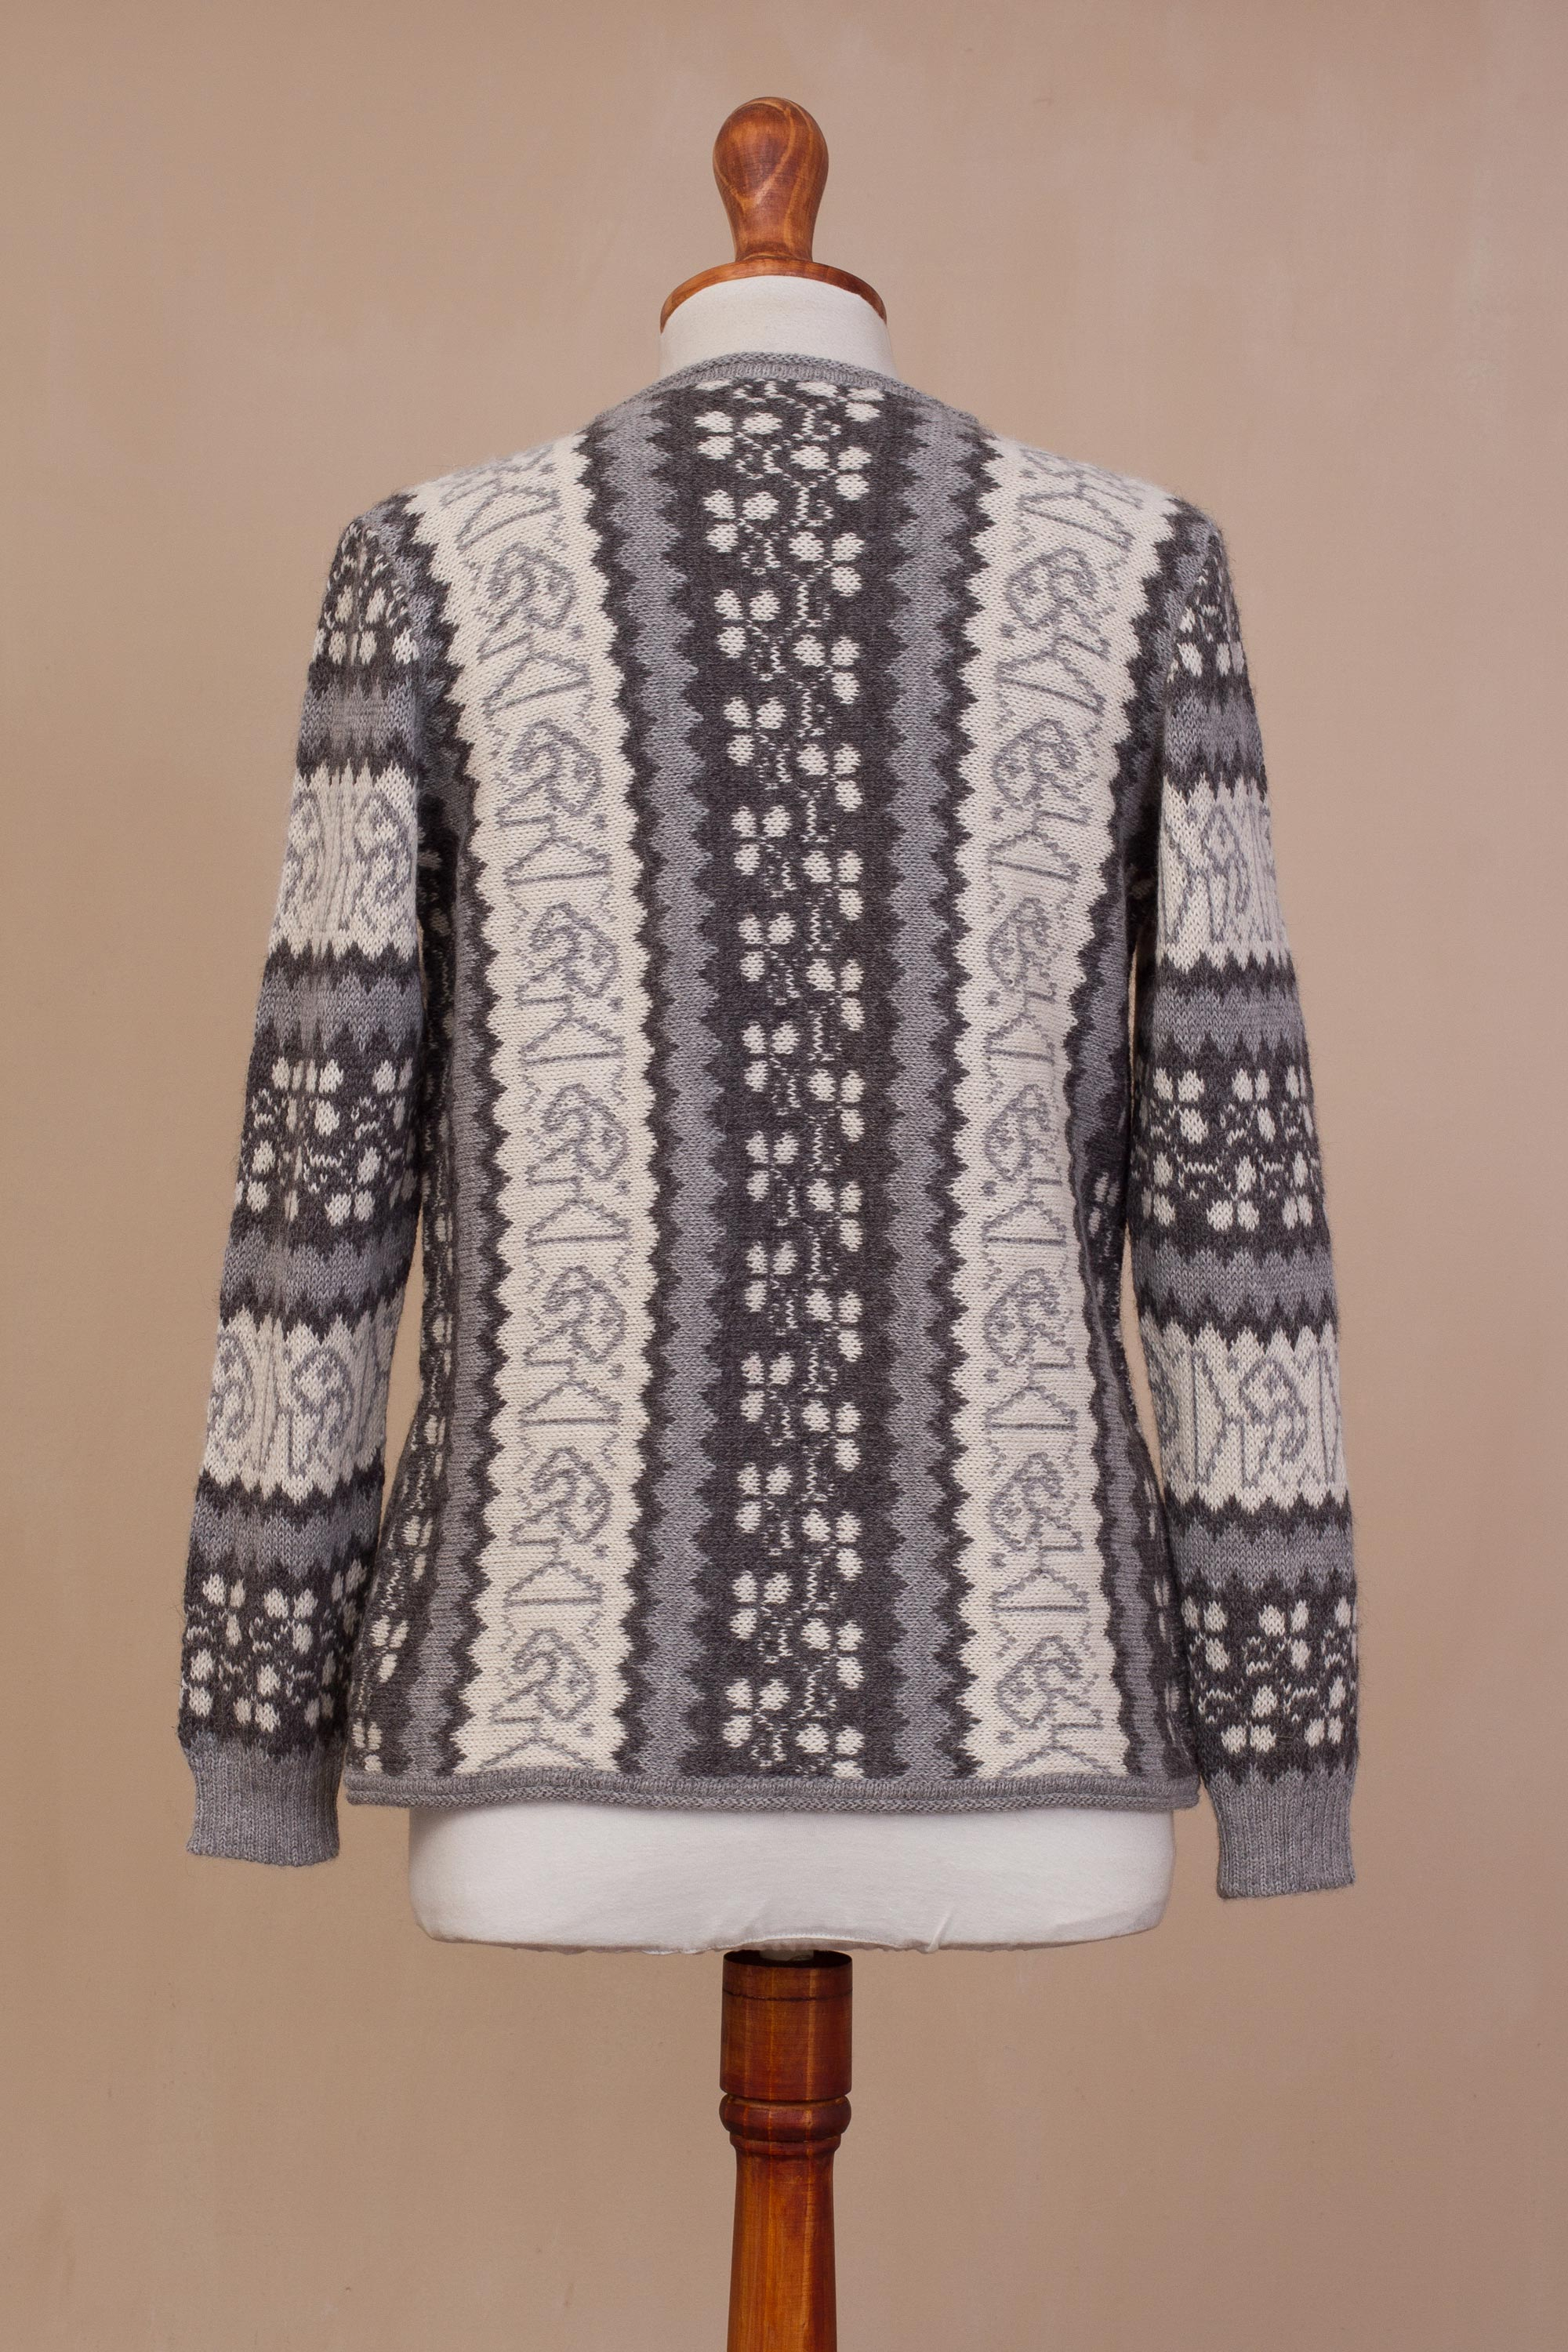 Knit Grey and Ivory Alpaca Cardigan Sweater from Peru - Cozy Warmth in ...